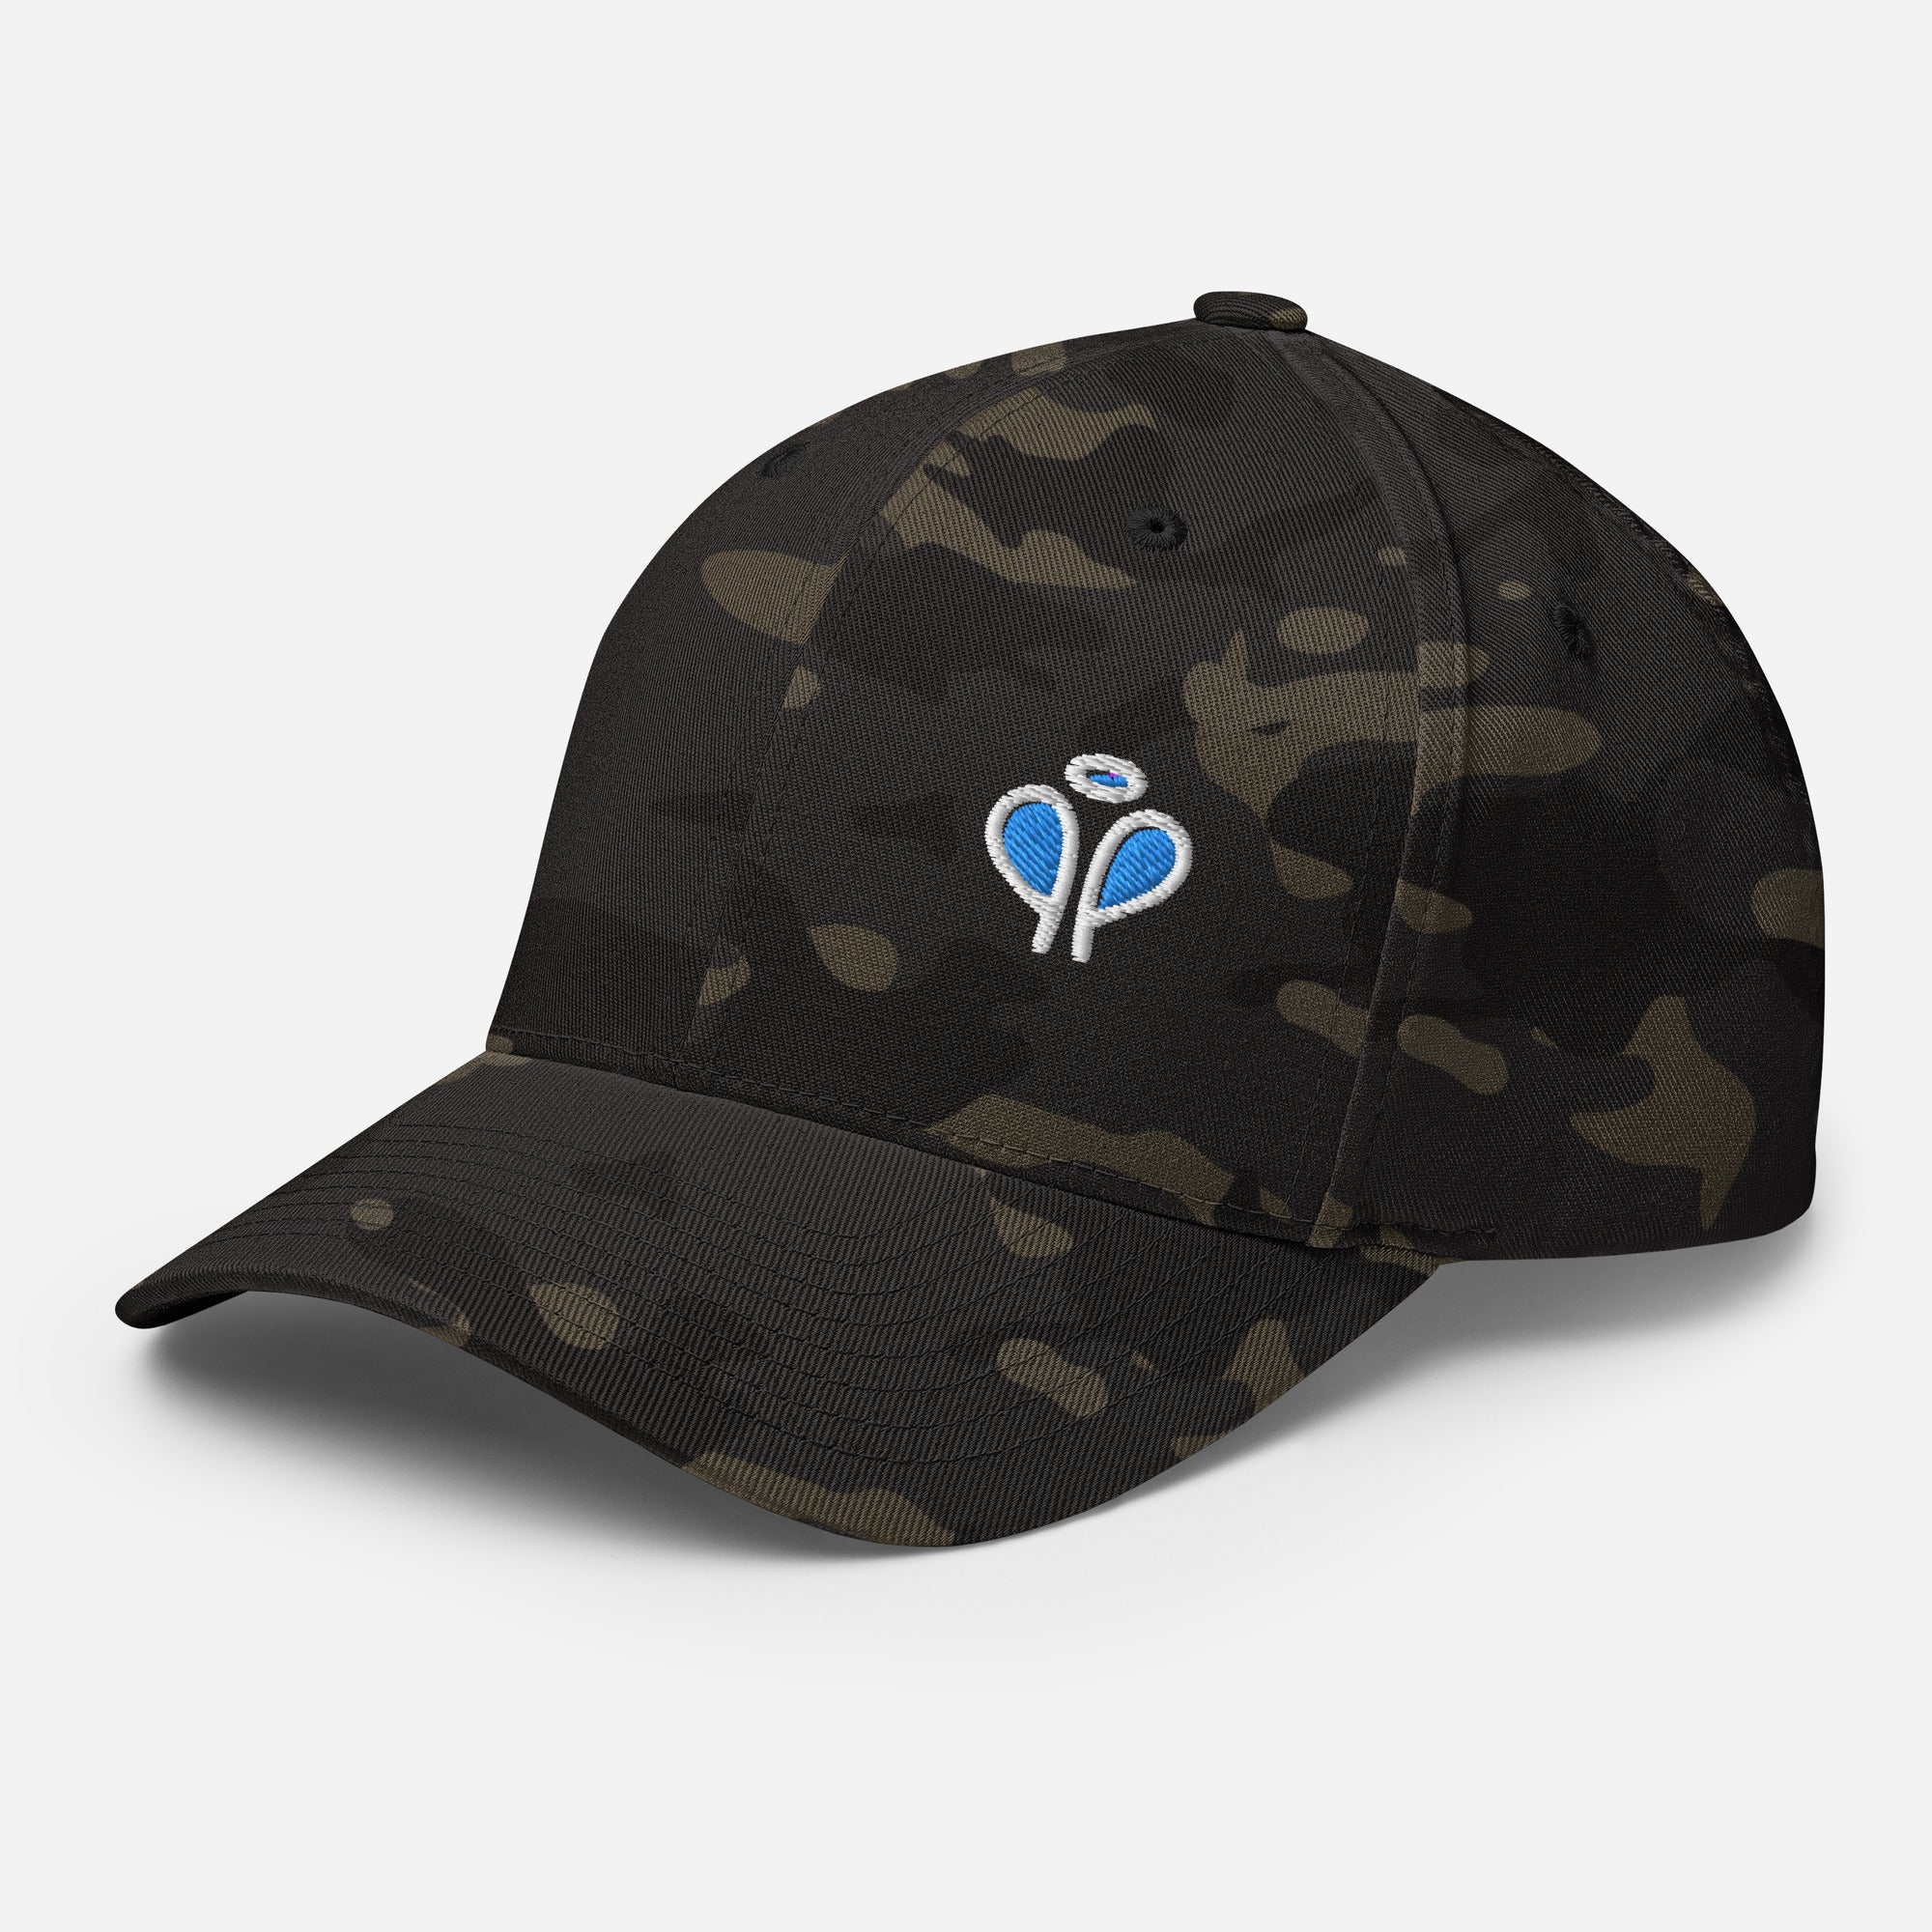 Provision Promise Angel Structured Flexfit Twill Cap